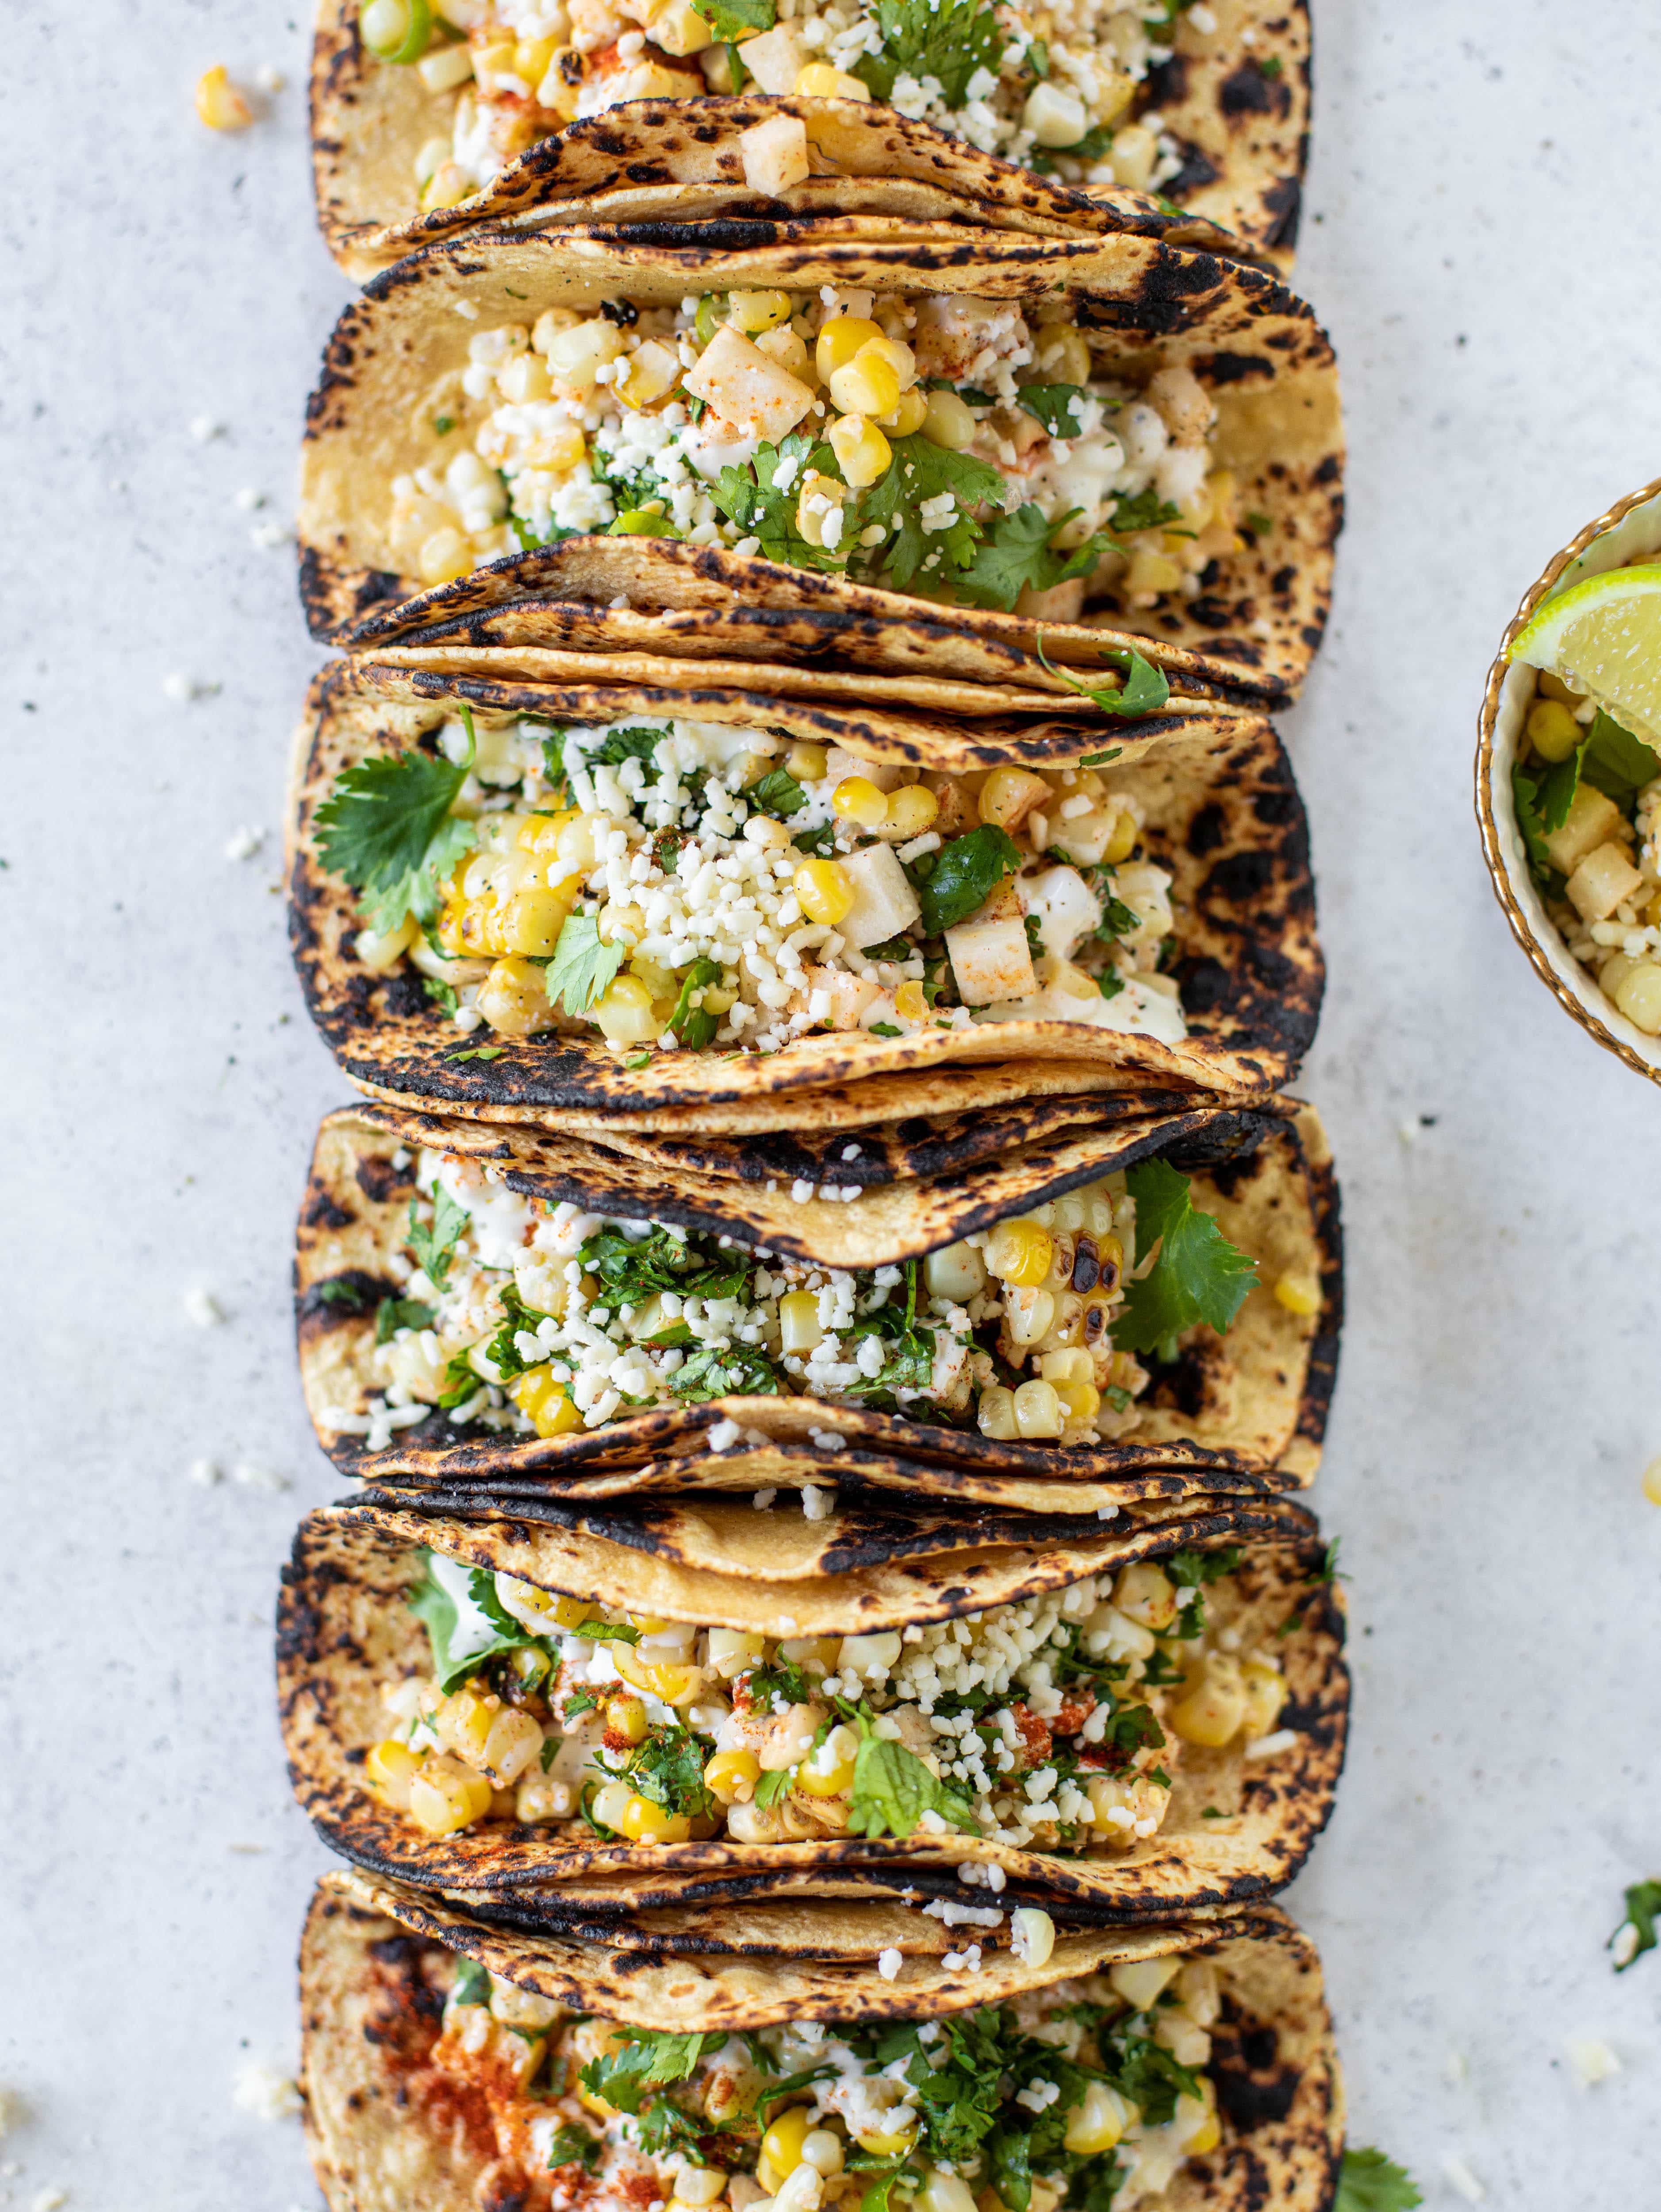 These street corn tacos are filled with a jicama corn salad and drizzled with garlic mayo. This little taco packs a major flavor punch.